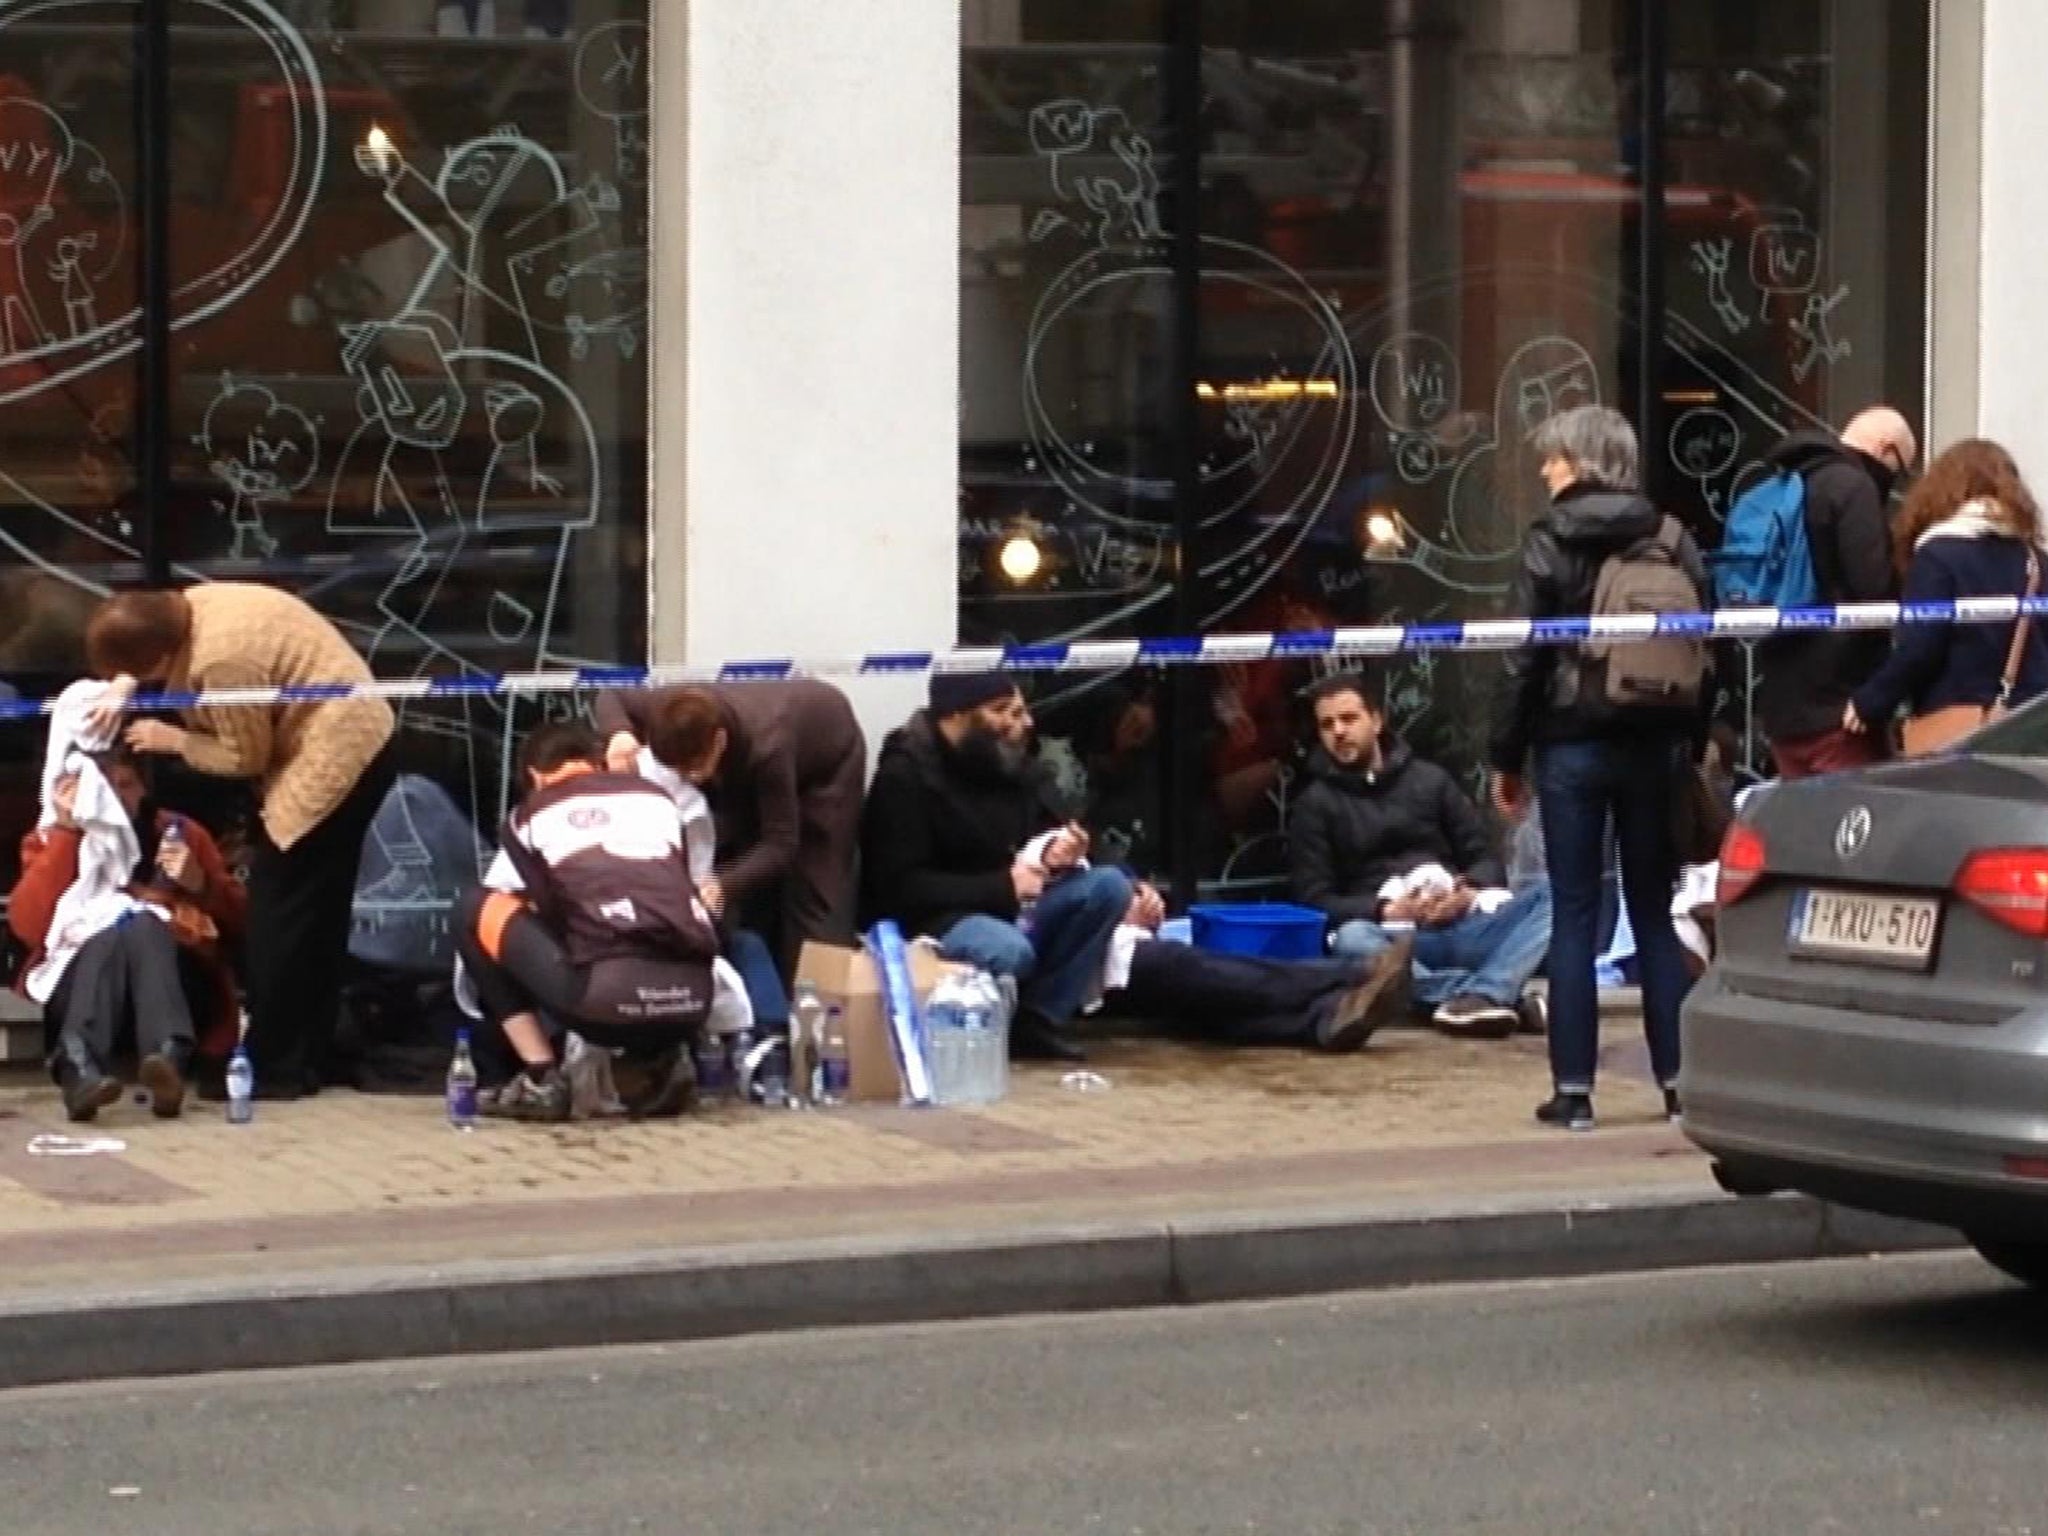 Wounded victims are treated outside the Brussels metro station after a bomb exploded on Tuesday morning.